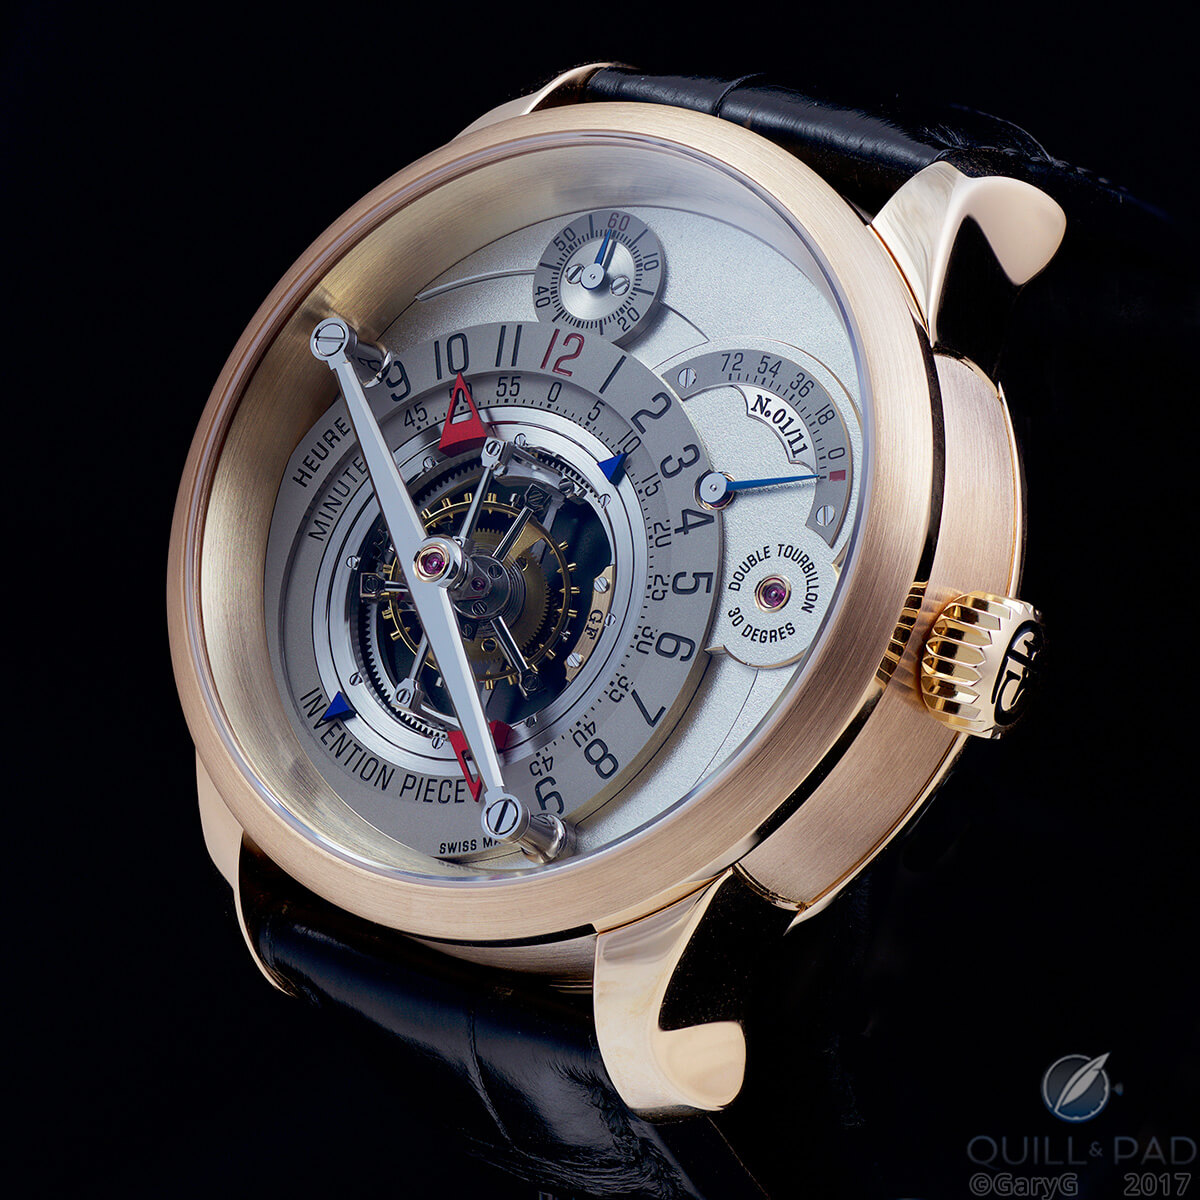 Object of desire: Greubel Forsey Invention Piece 1, No. 01/11 in red gold